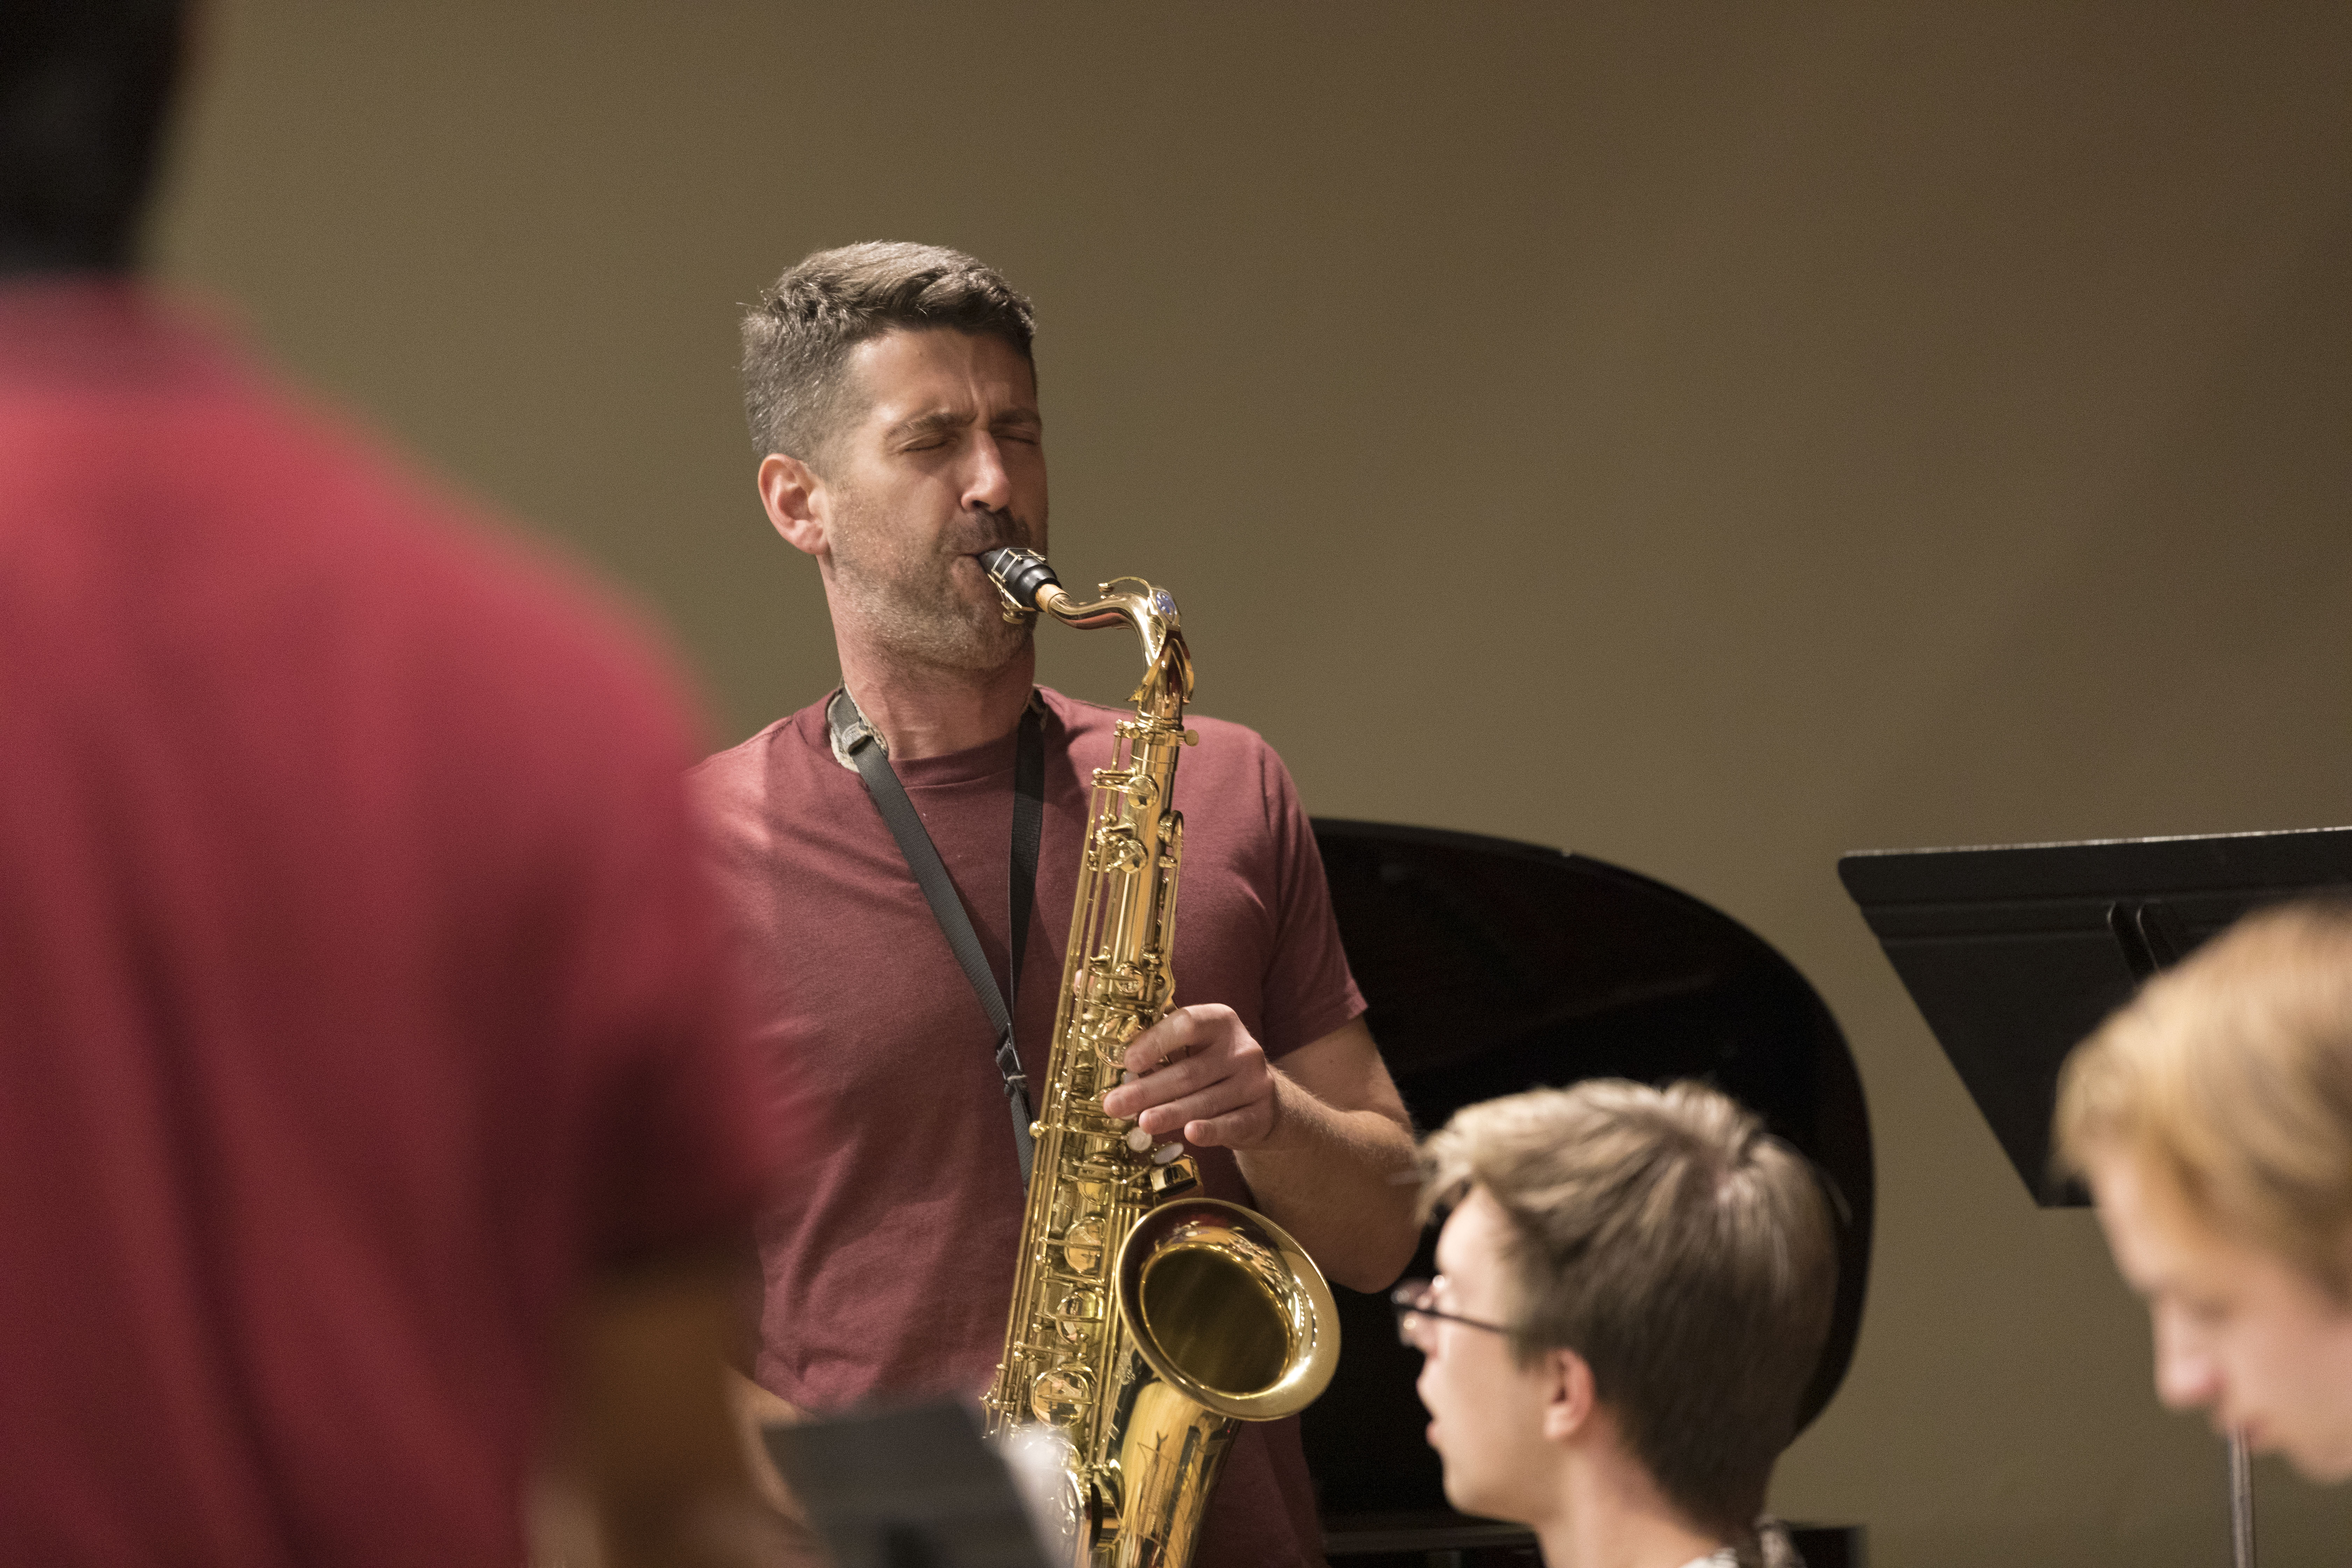 Donnie Norton, UP Jazz Professor, playing the saxophone with students